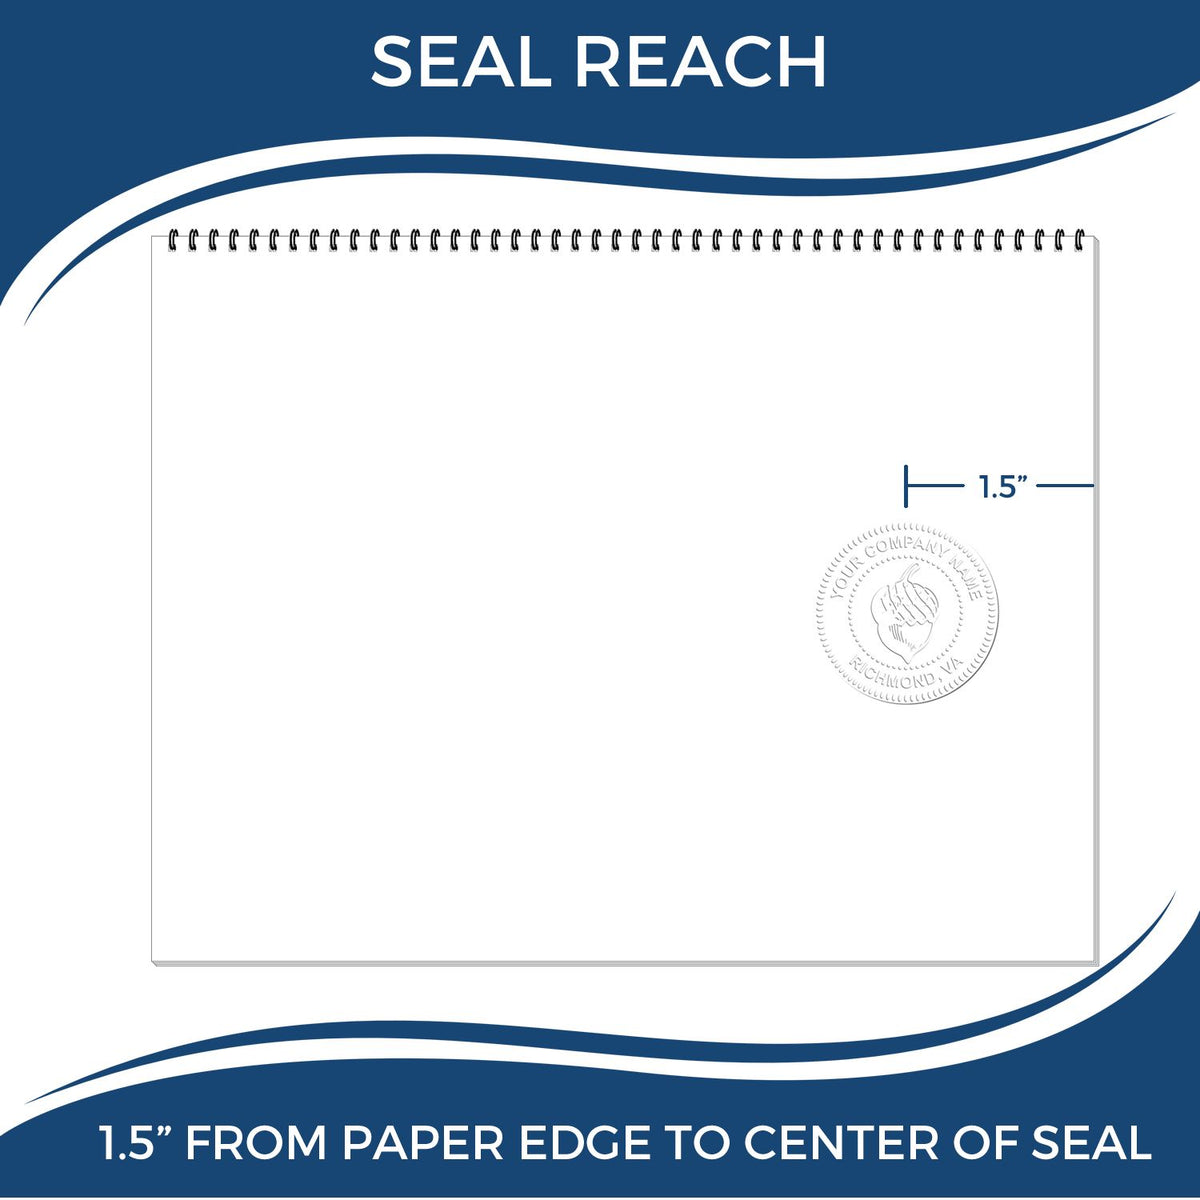 An infographic showing the seal reach which is represented by a ruler and a miniature seal image of the Soft District of Columbia Professional Engineer Seal